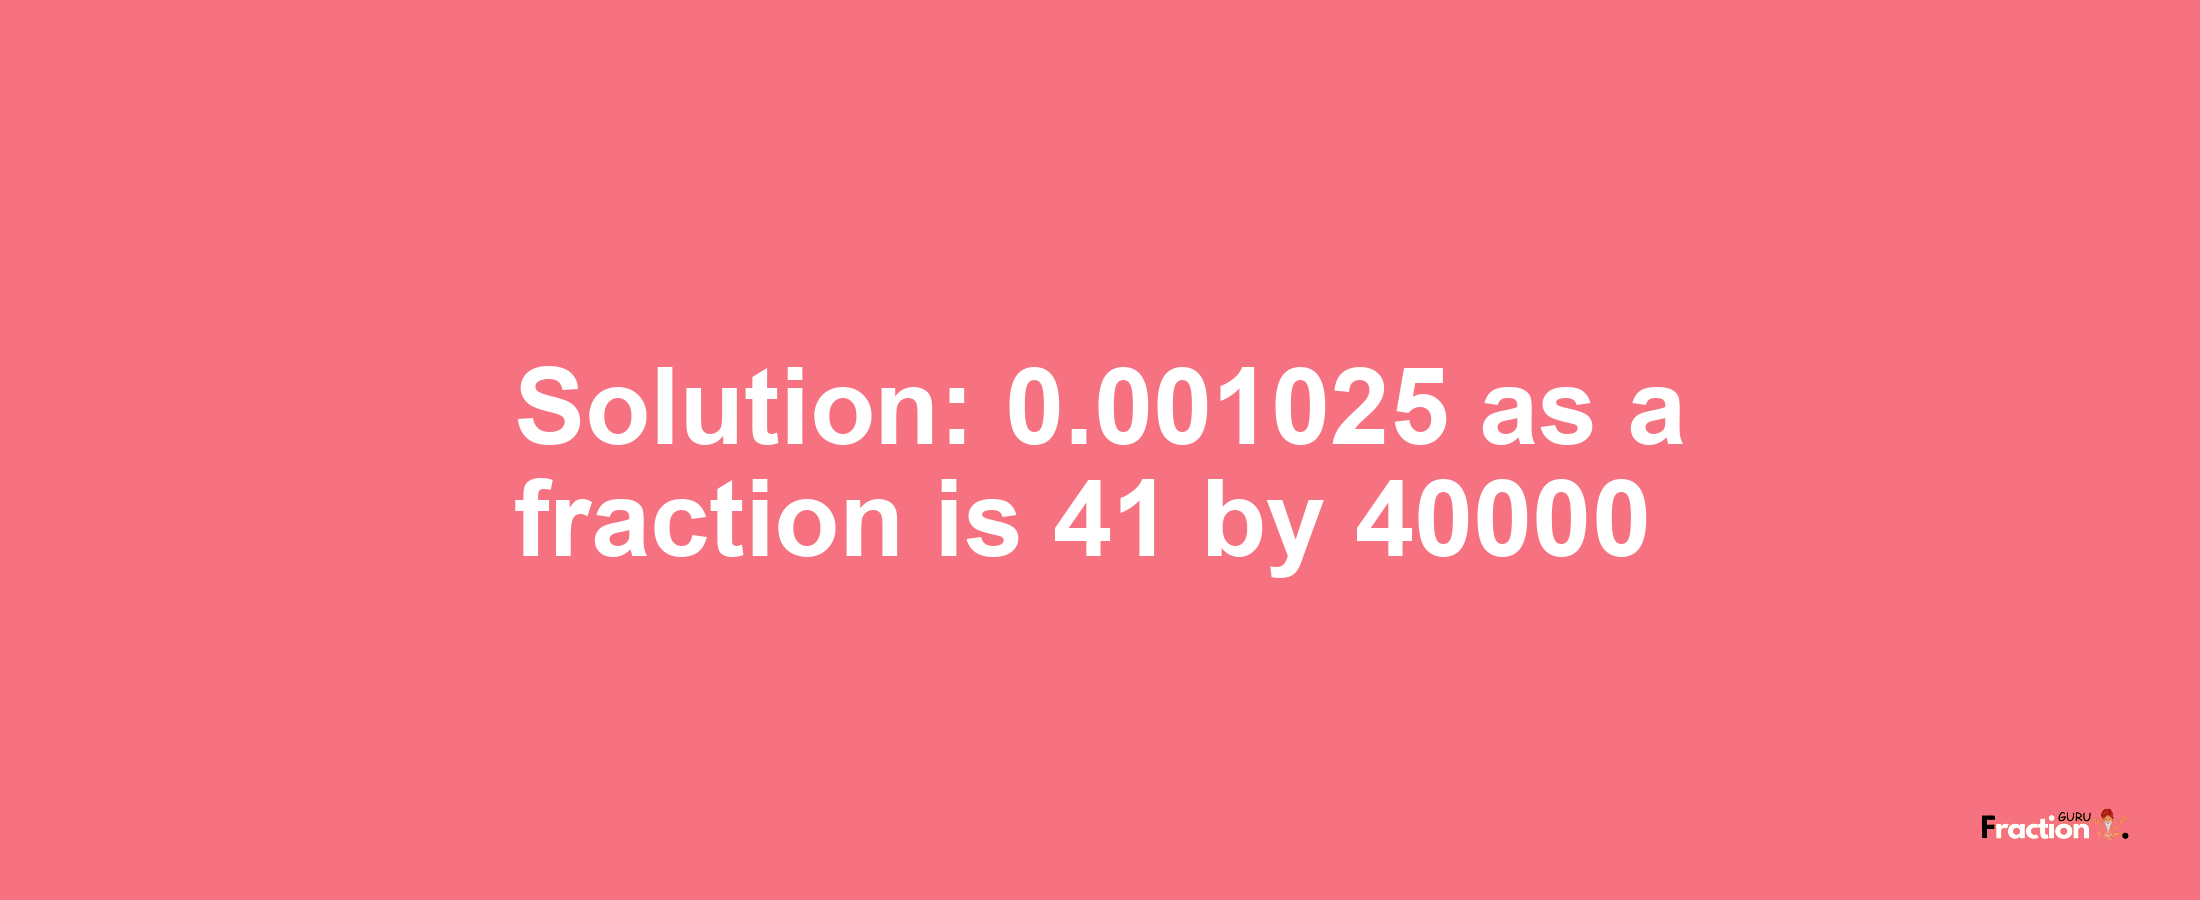 Solution:0.001025 as a fraction is 41/40000